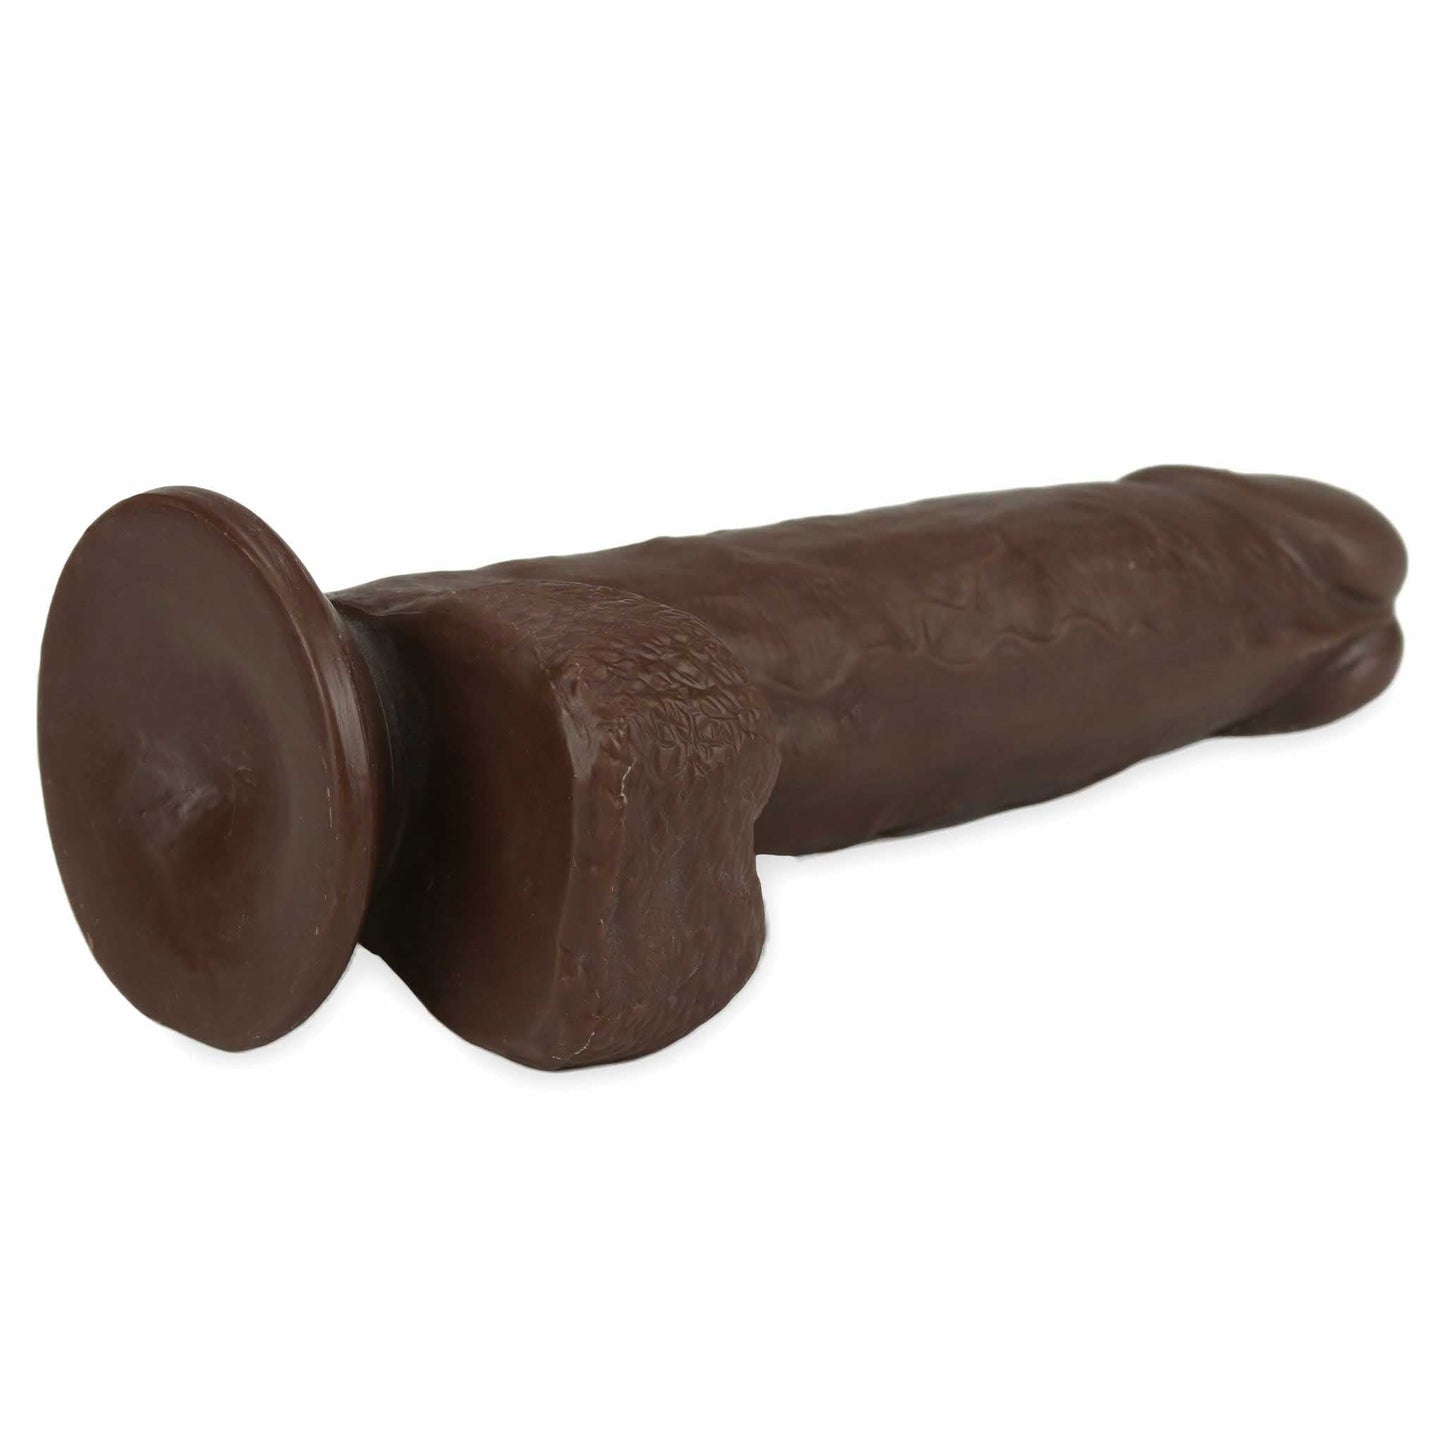 back view of the get lucky real skin suction cup dildo luck dark brown 7.5in